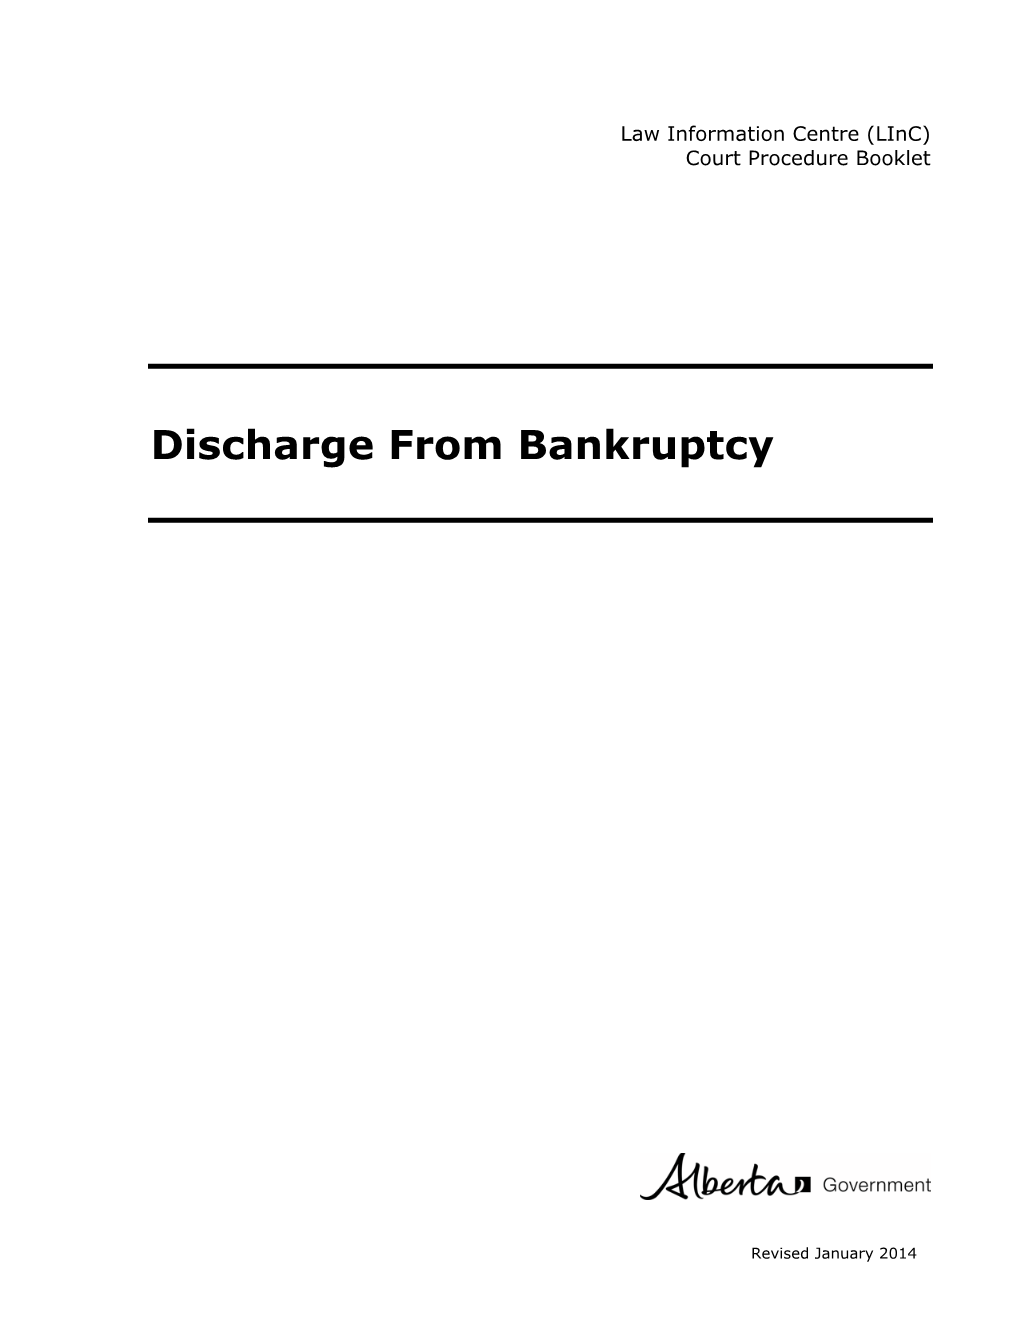 Discharge from Bankruptcy